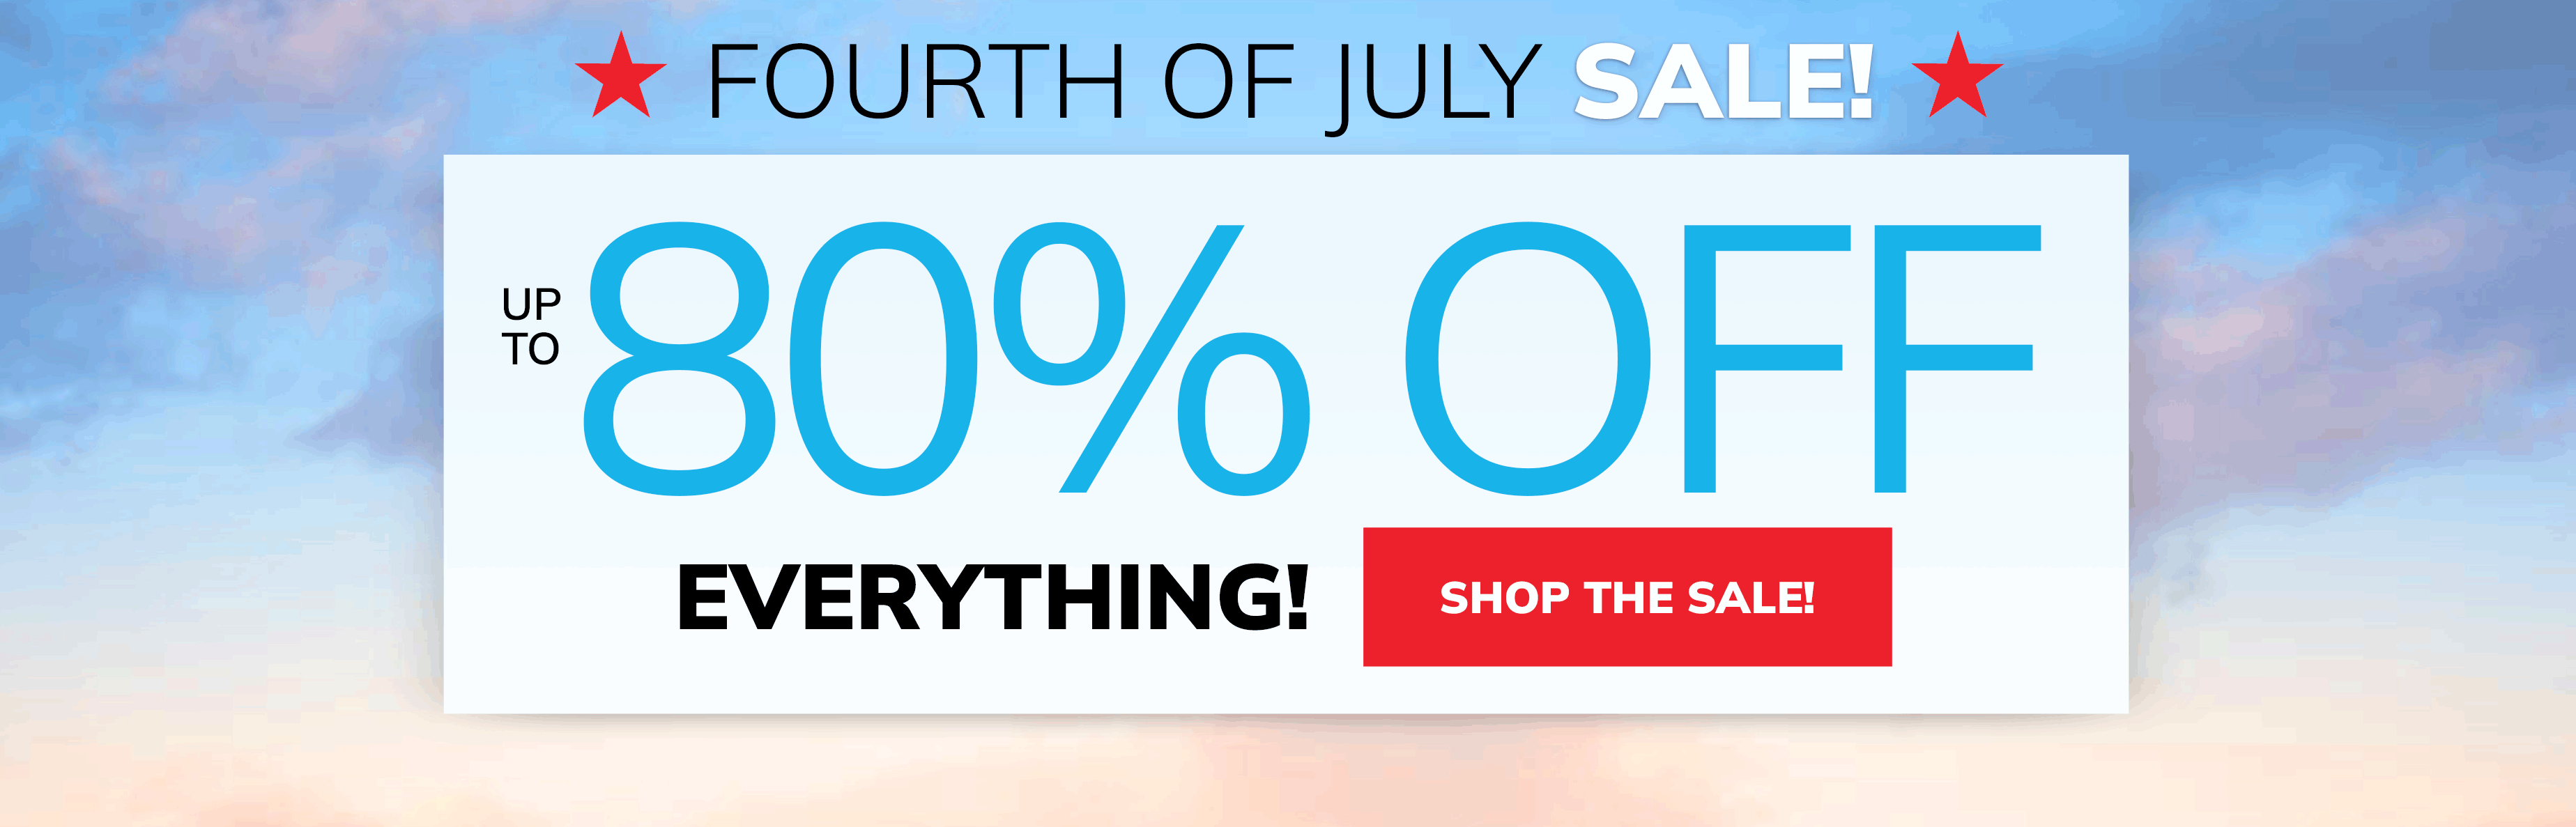 fourth of july sale up to 80% off everything